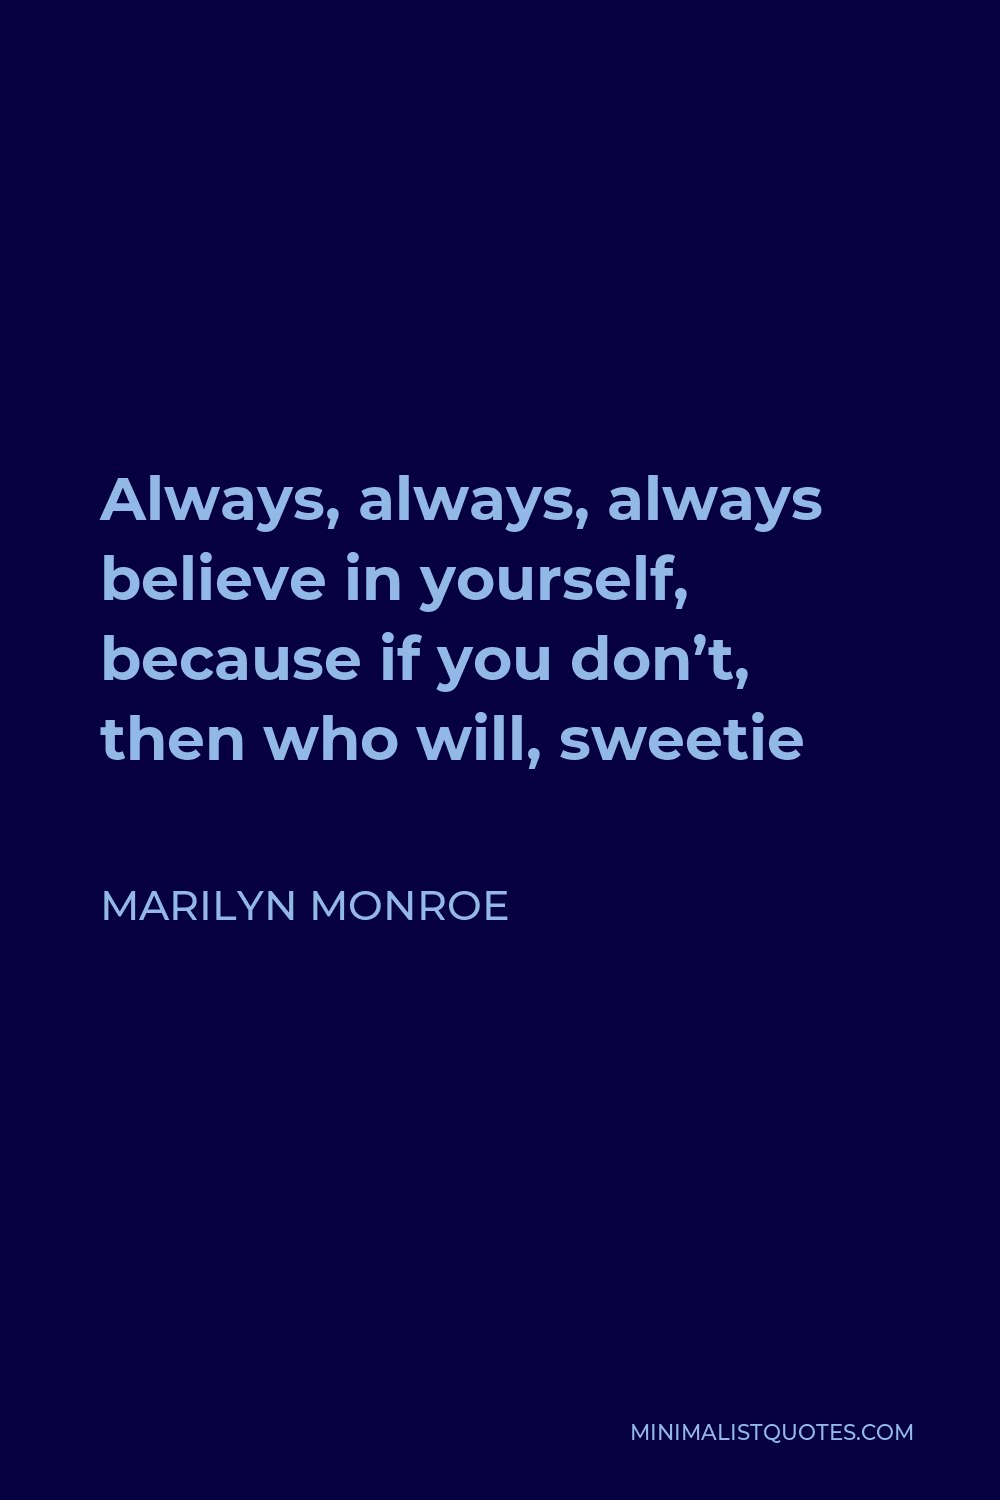 Marilyn Monroe Quote - Always, always, always believe in yourself, because if you don’t, then who will, sweetie